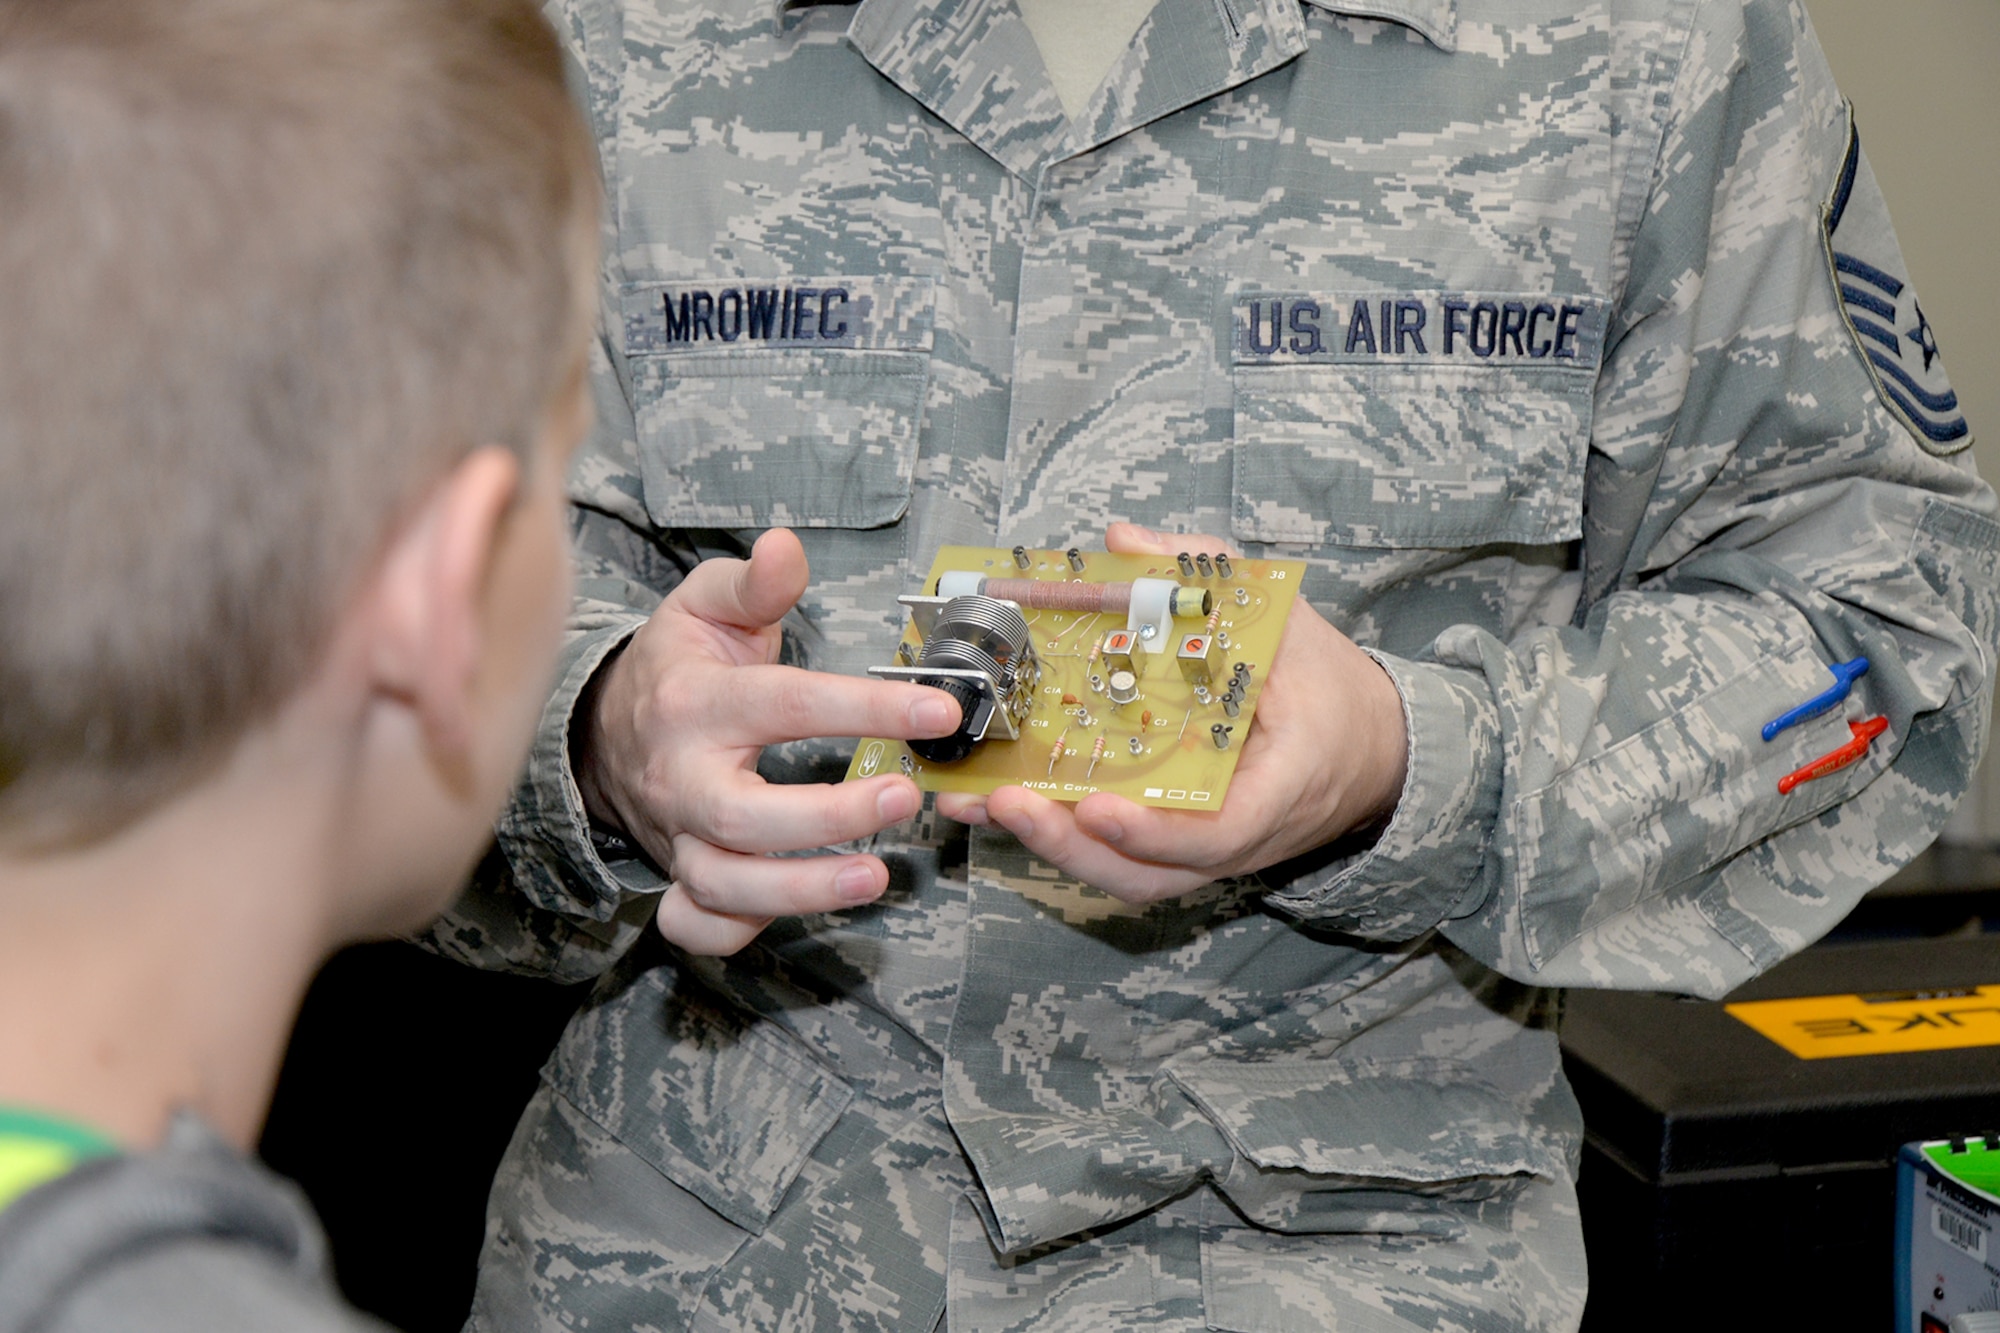 Master Sgt. Robert Mrowiec, 312th Training Squadron course development manager, demonstrates the makeup of a radio to a Wall Middle School student at Brandenburg Hall during a tour on Goodfellow Air Force Base, Texas, Oct. 24, 2016. Mrowiec explained that 312th TRS students are trained on how to make simple radios for use in emergencies. (U.S. Air Force photo by Airman 1st Class Randall Moose)